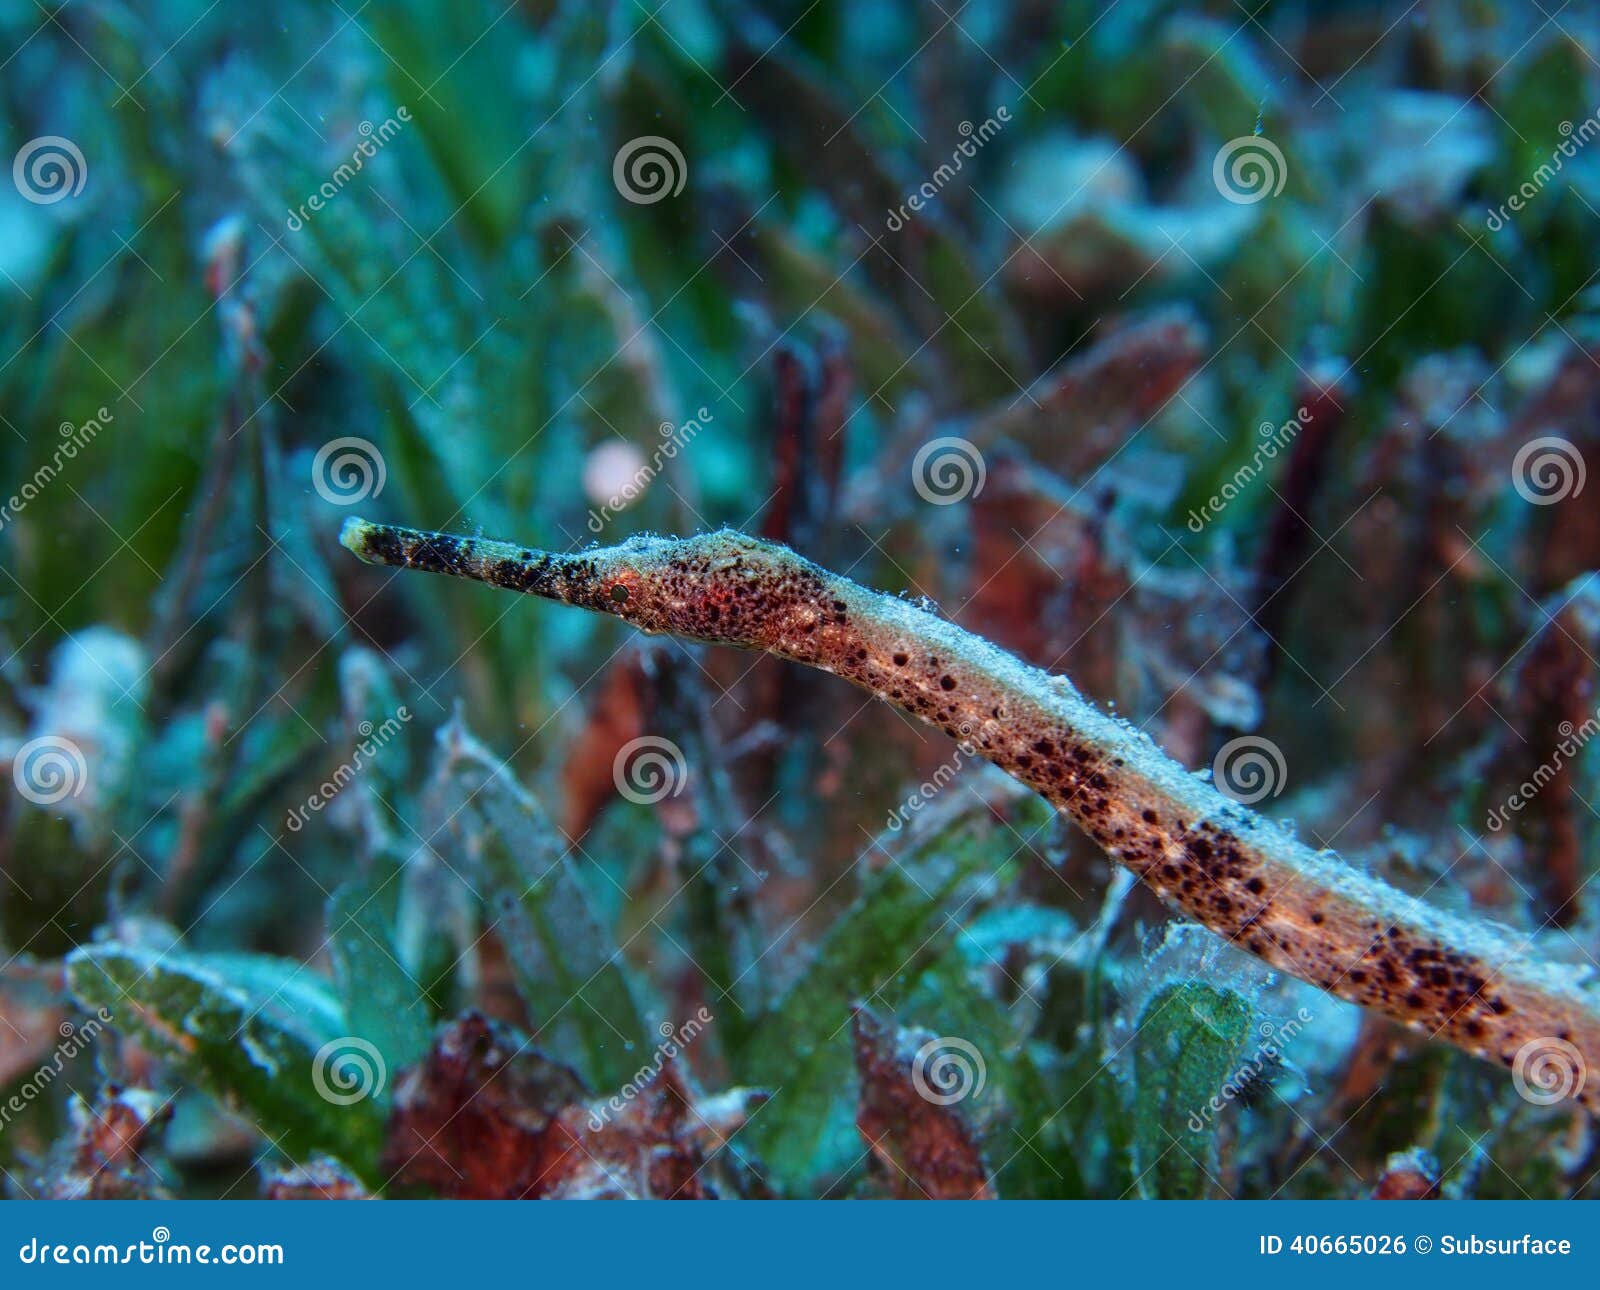 double-ended pipefish red sea in sea grass